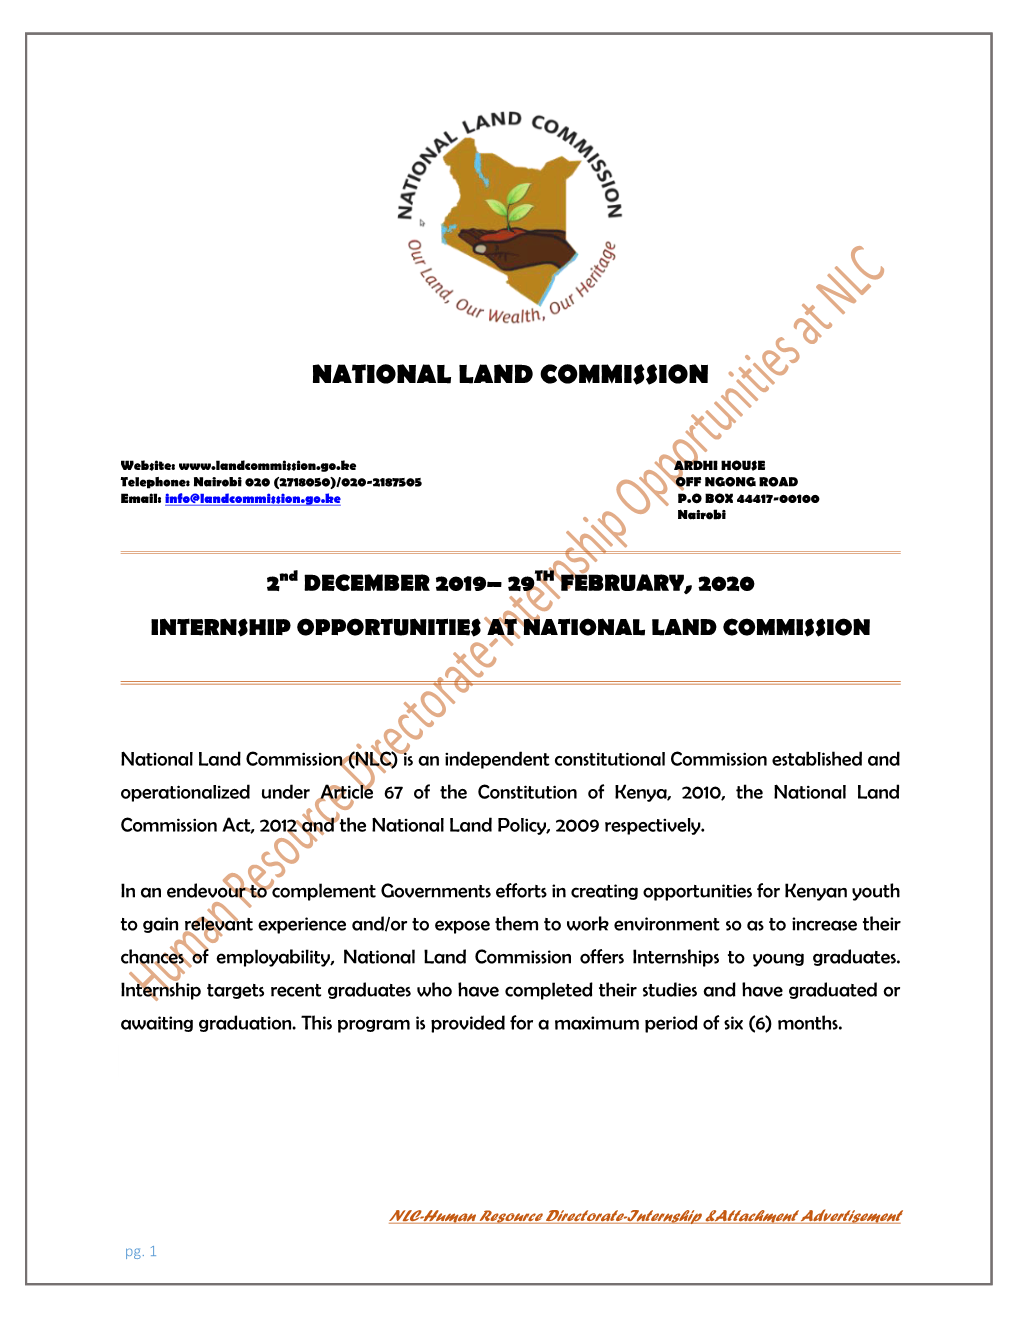 Internship Opportunities at National Land Commission